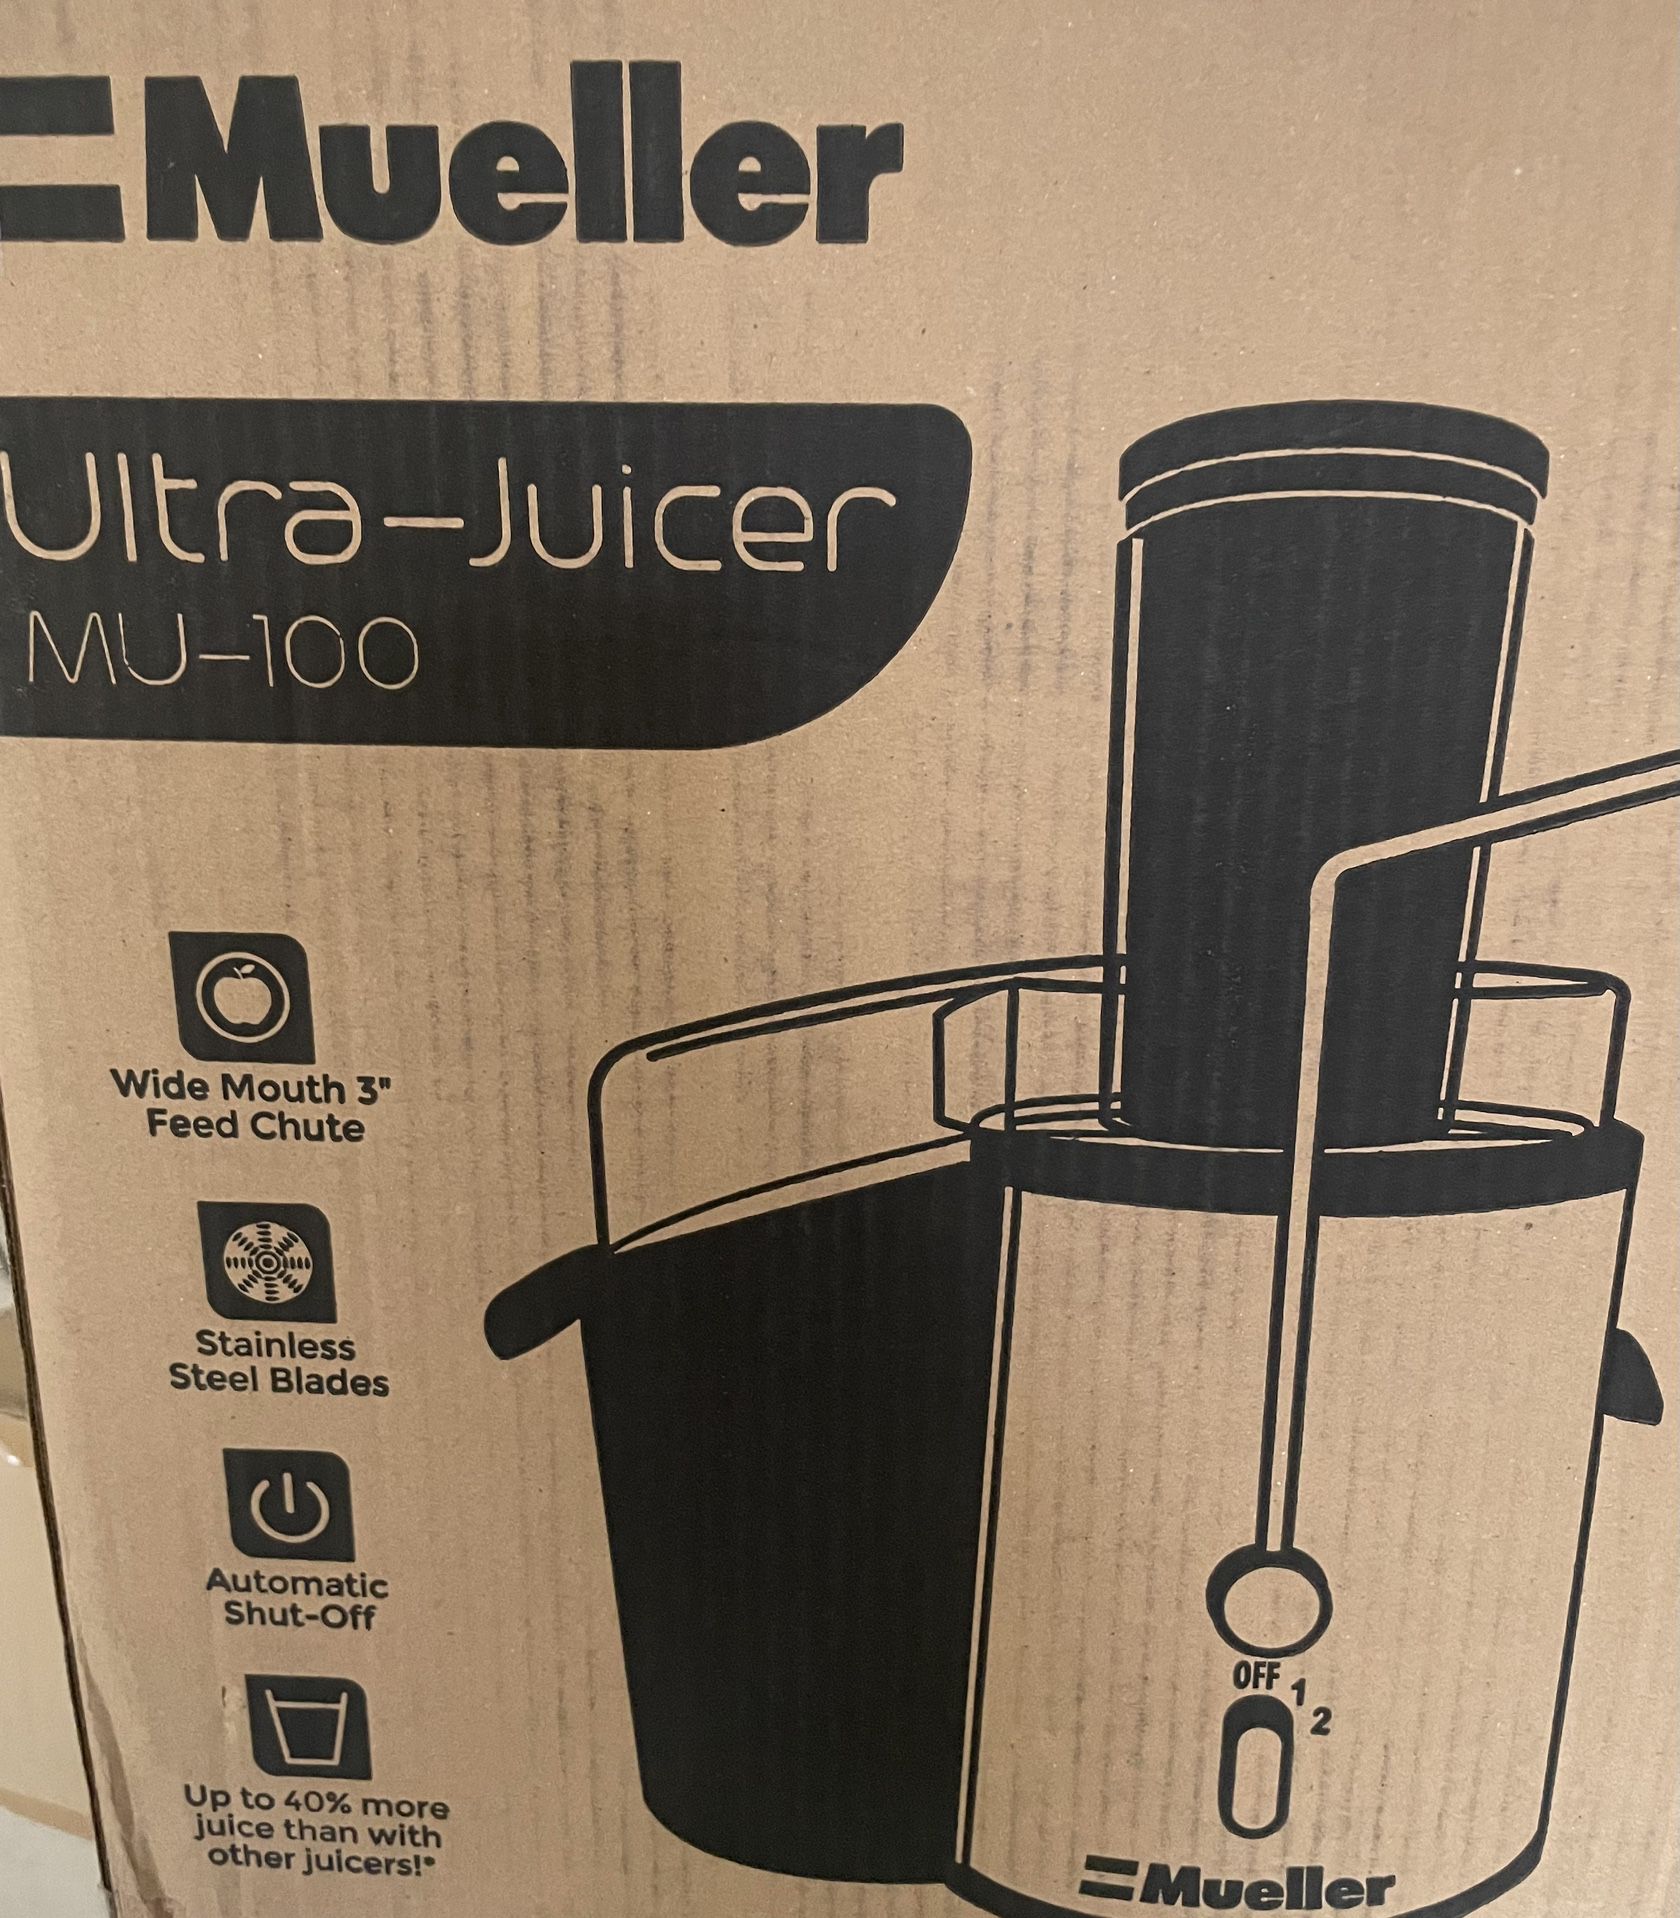 Mueller Juicer Ultra Power, Easy Clean Extractor Press Centrifugal Juicing Machine, Wide 3 Feed Chute for Whole Fruit Vegetable